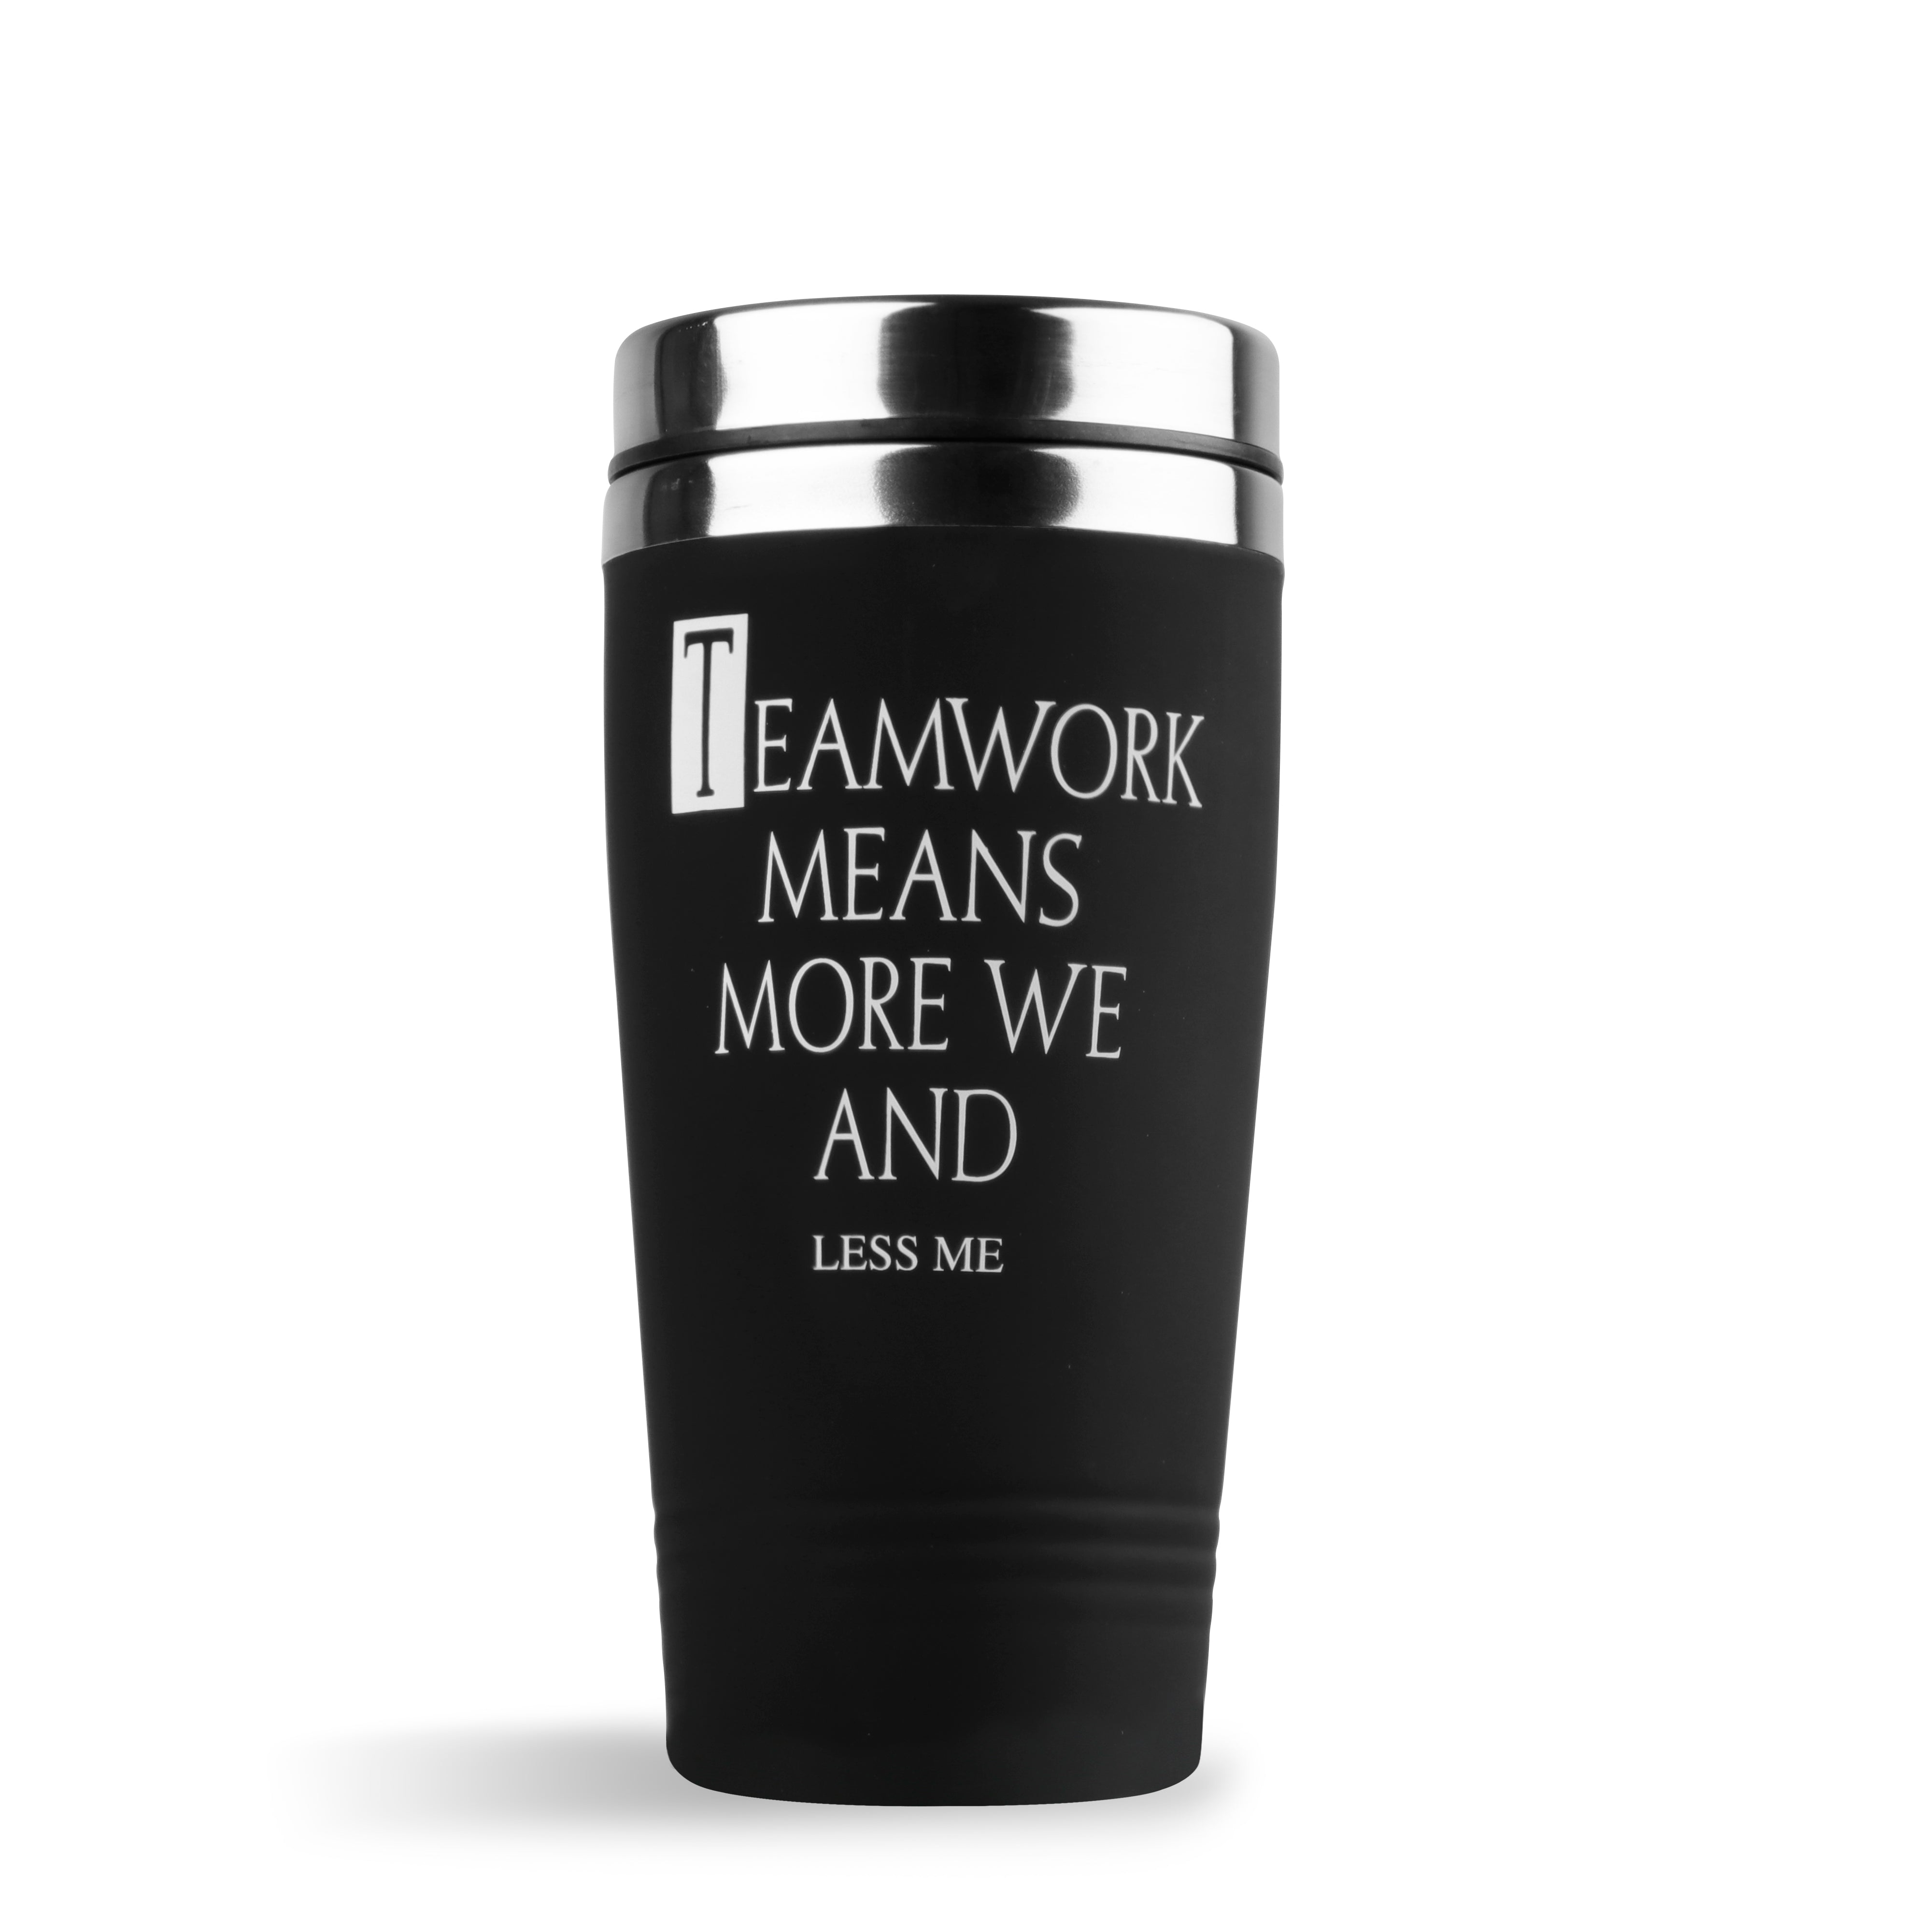 Archies Printed Stainless Steel Sipper/Shaker & Notebook combo with Corporate Quote Theme